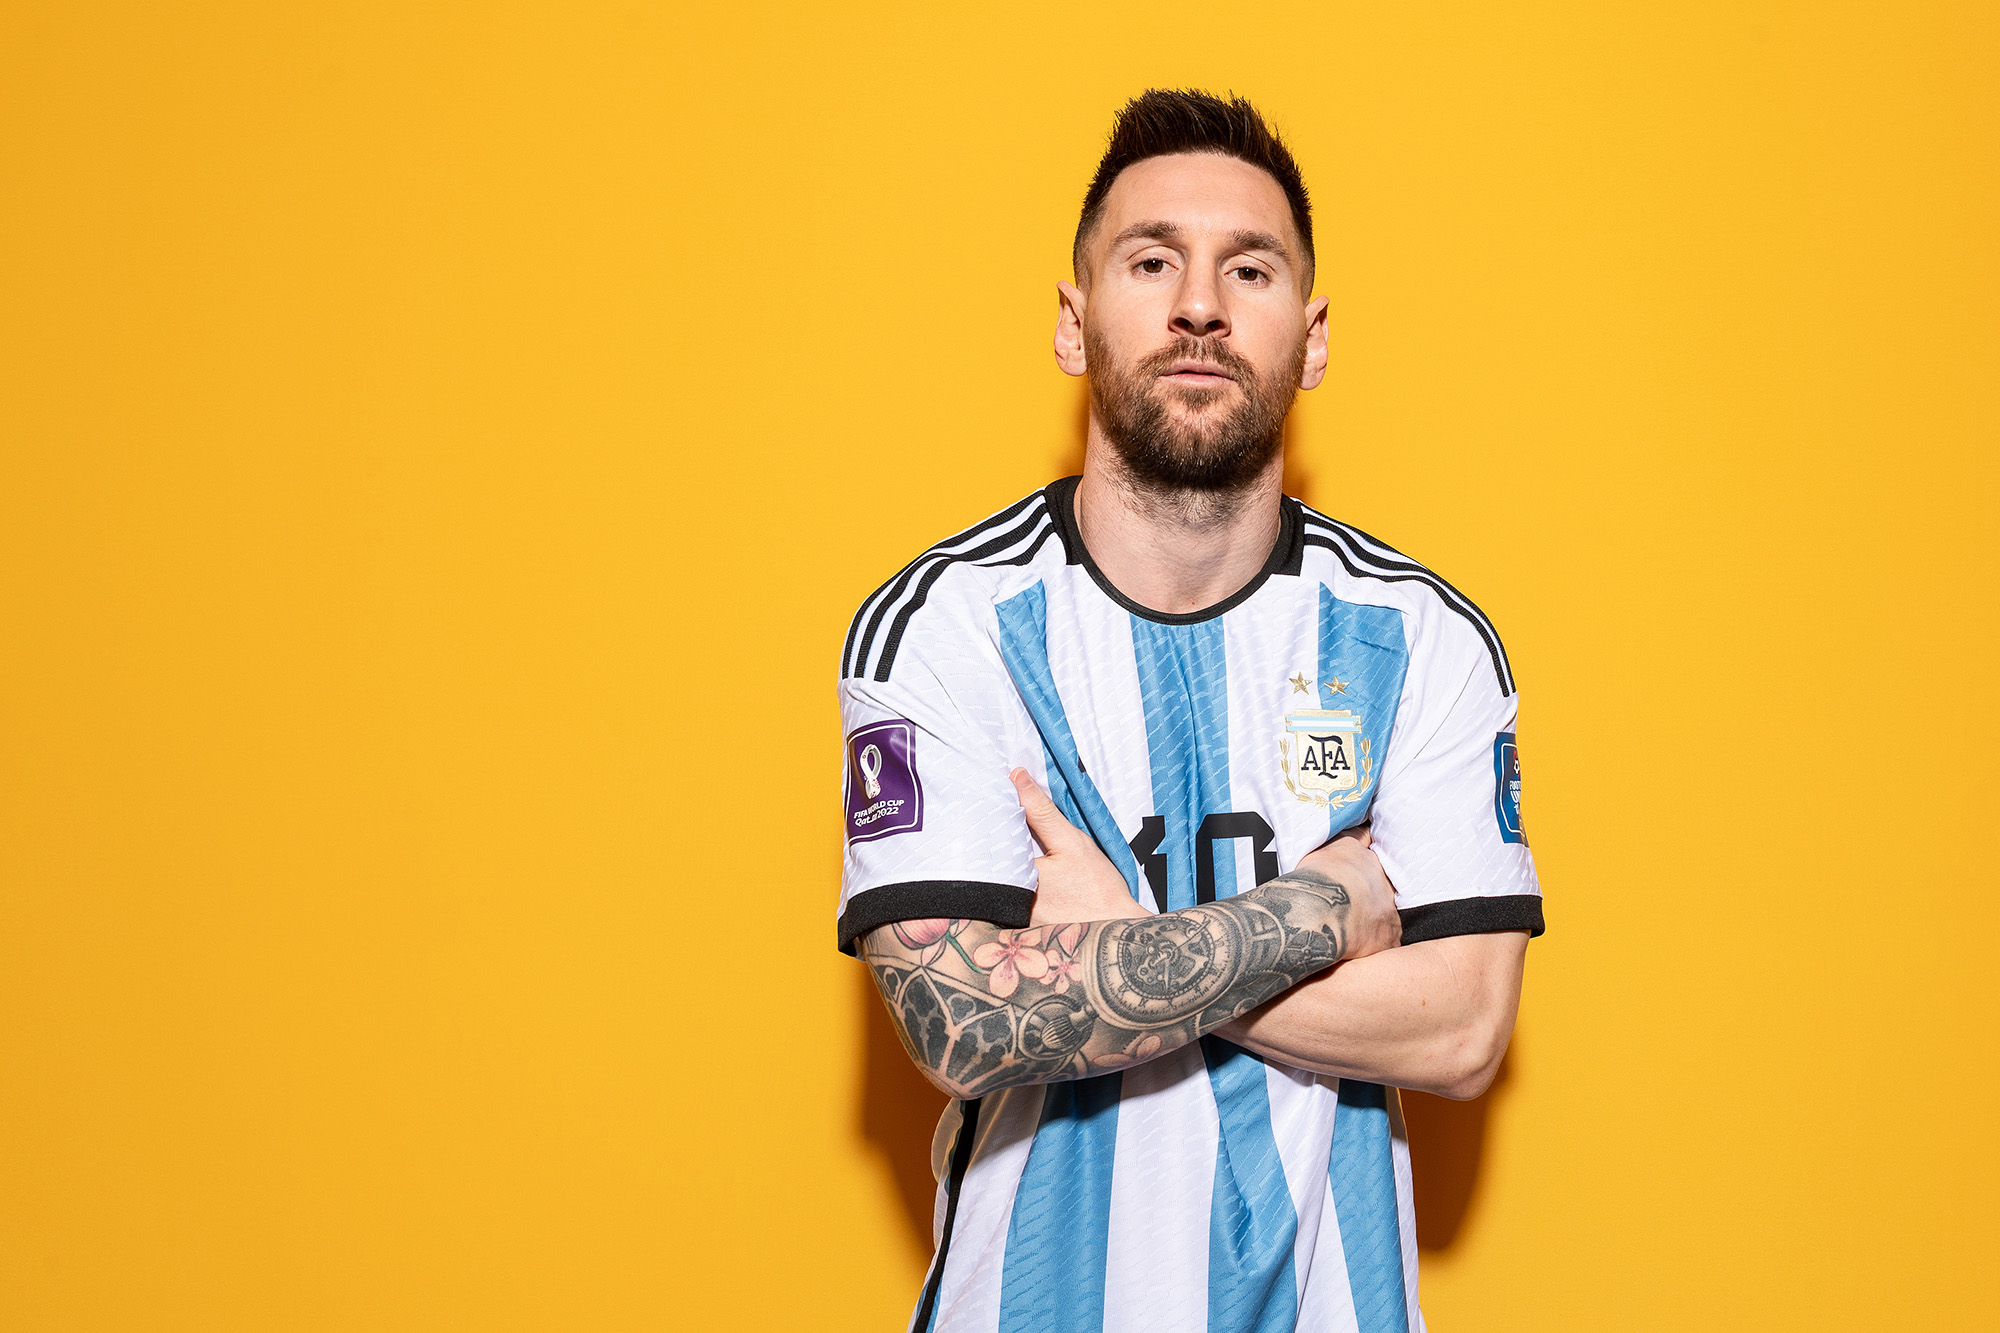 Lionel Messi of Argentina poses during an official FIFA World Cup Qatar 2022 portrait session on November 19, in Doha, Qatar.